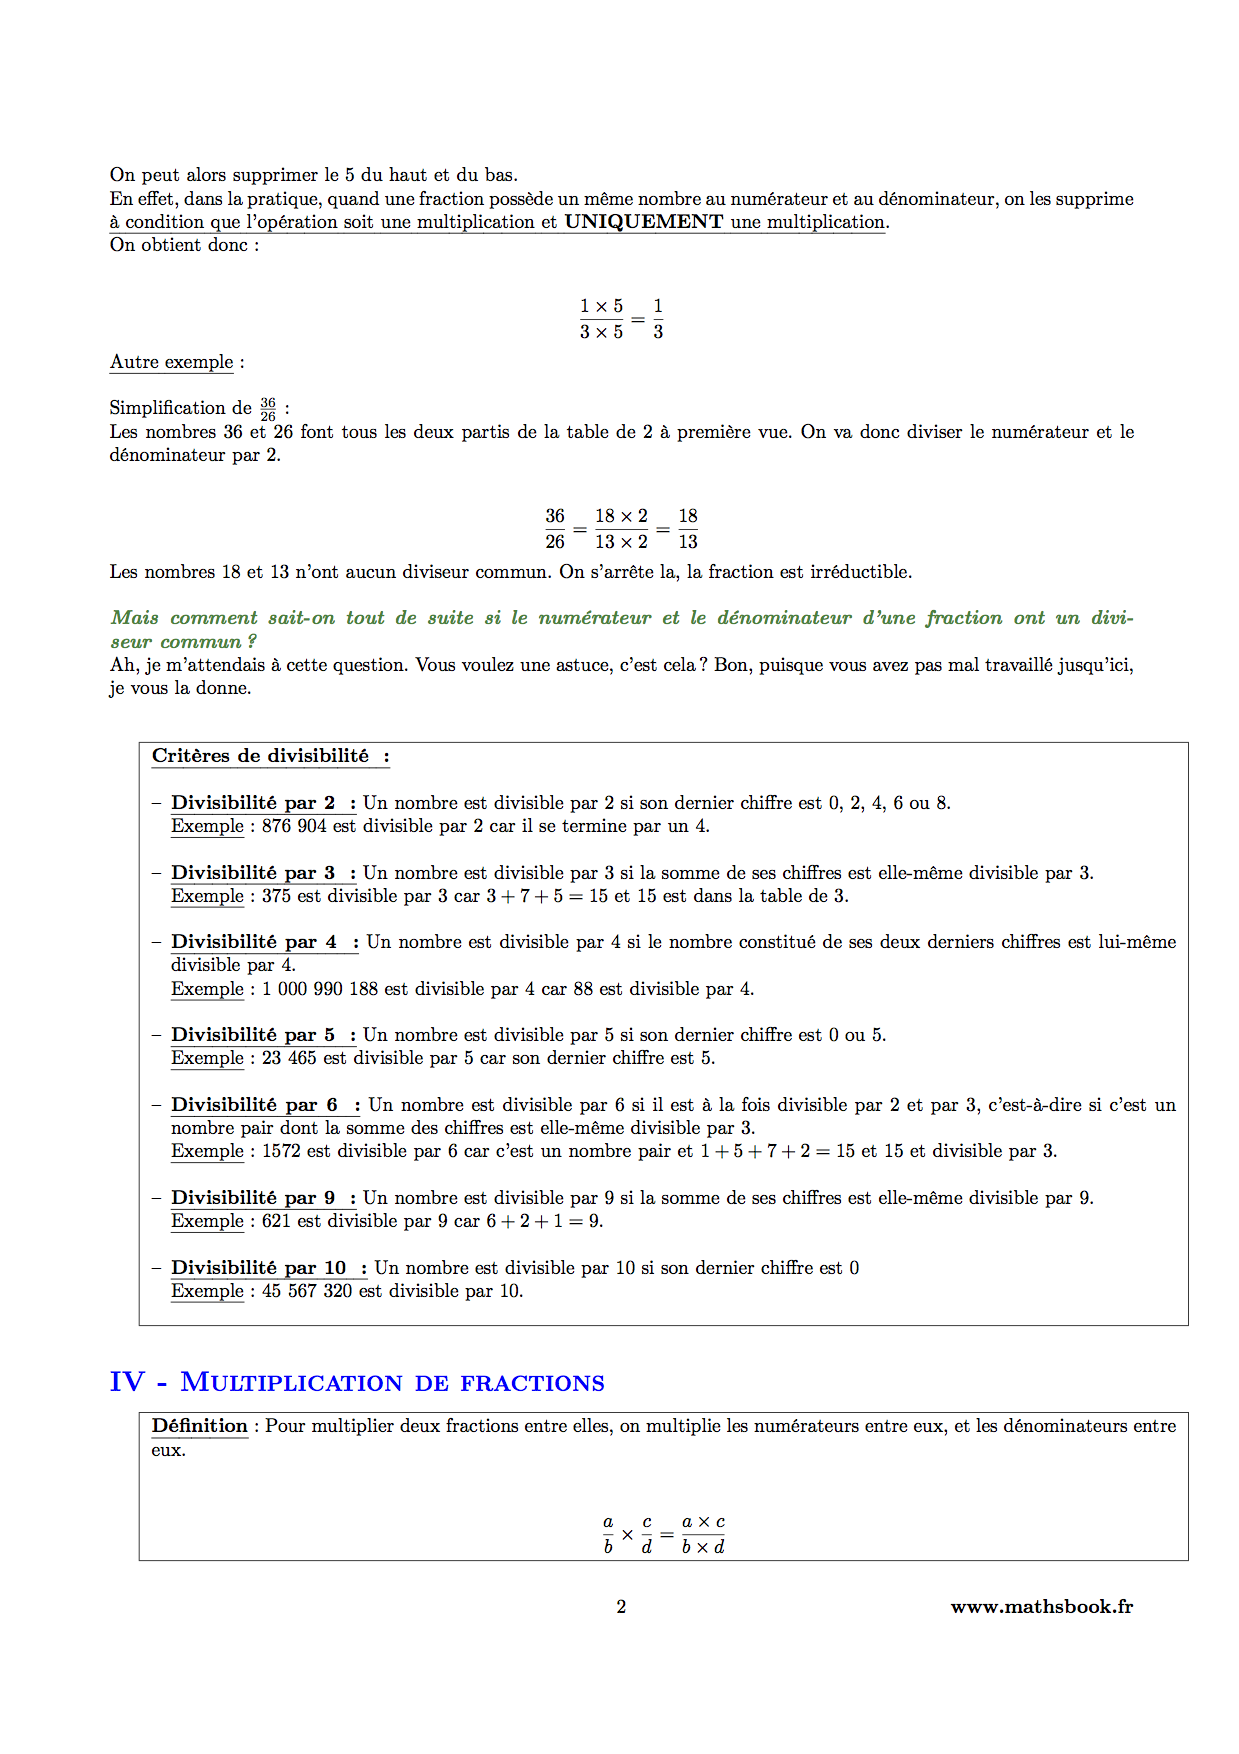 fractions irreductibles